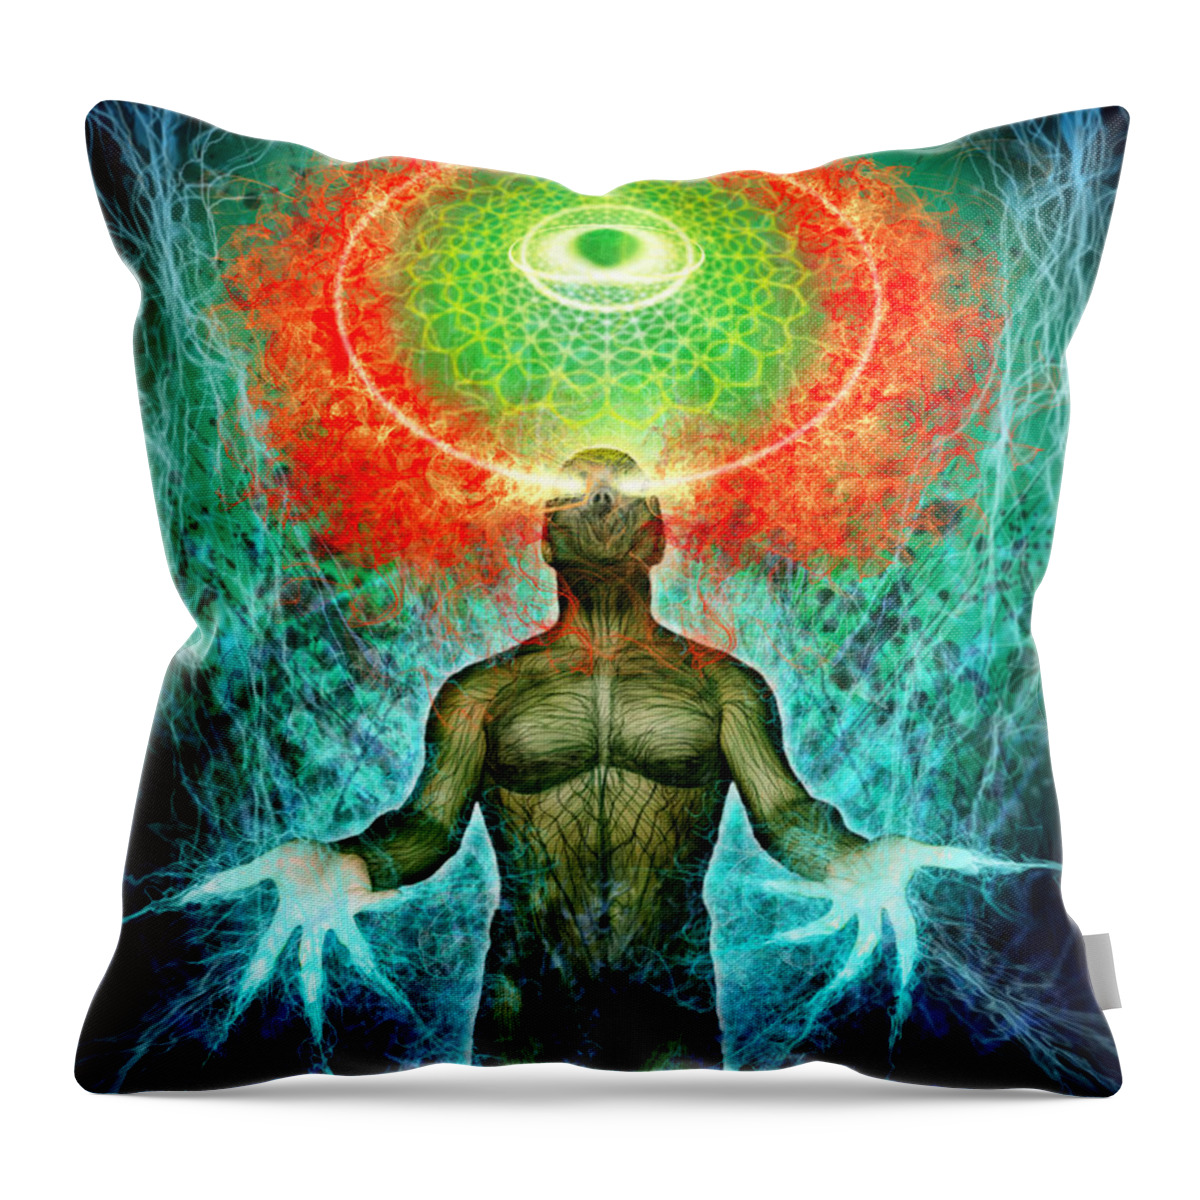 Tonykoehl Throw Pillow featuring the mixed media Inside the Inside by Tony Koehl